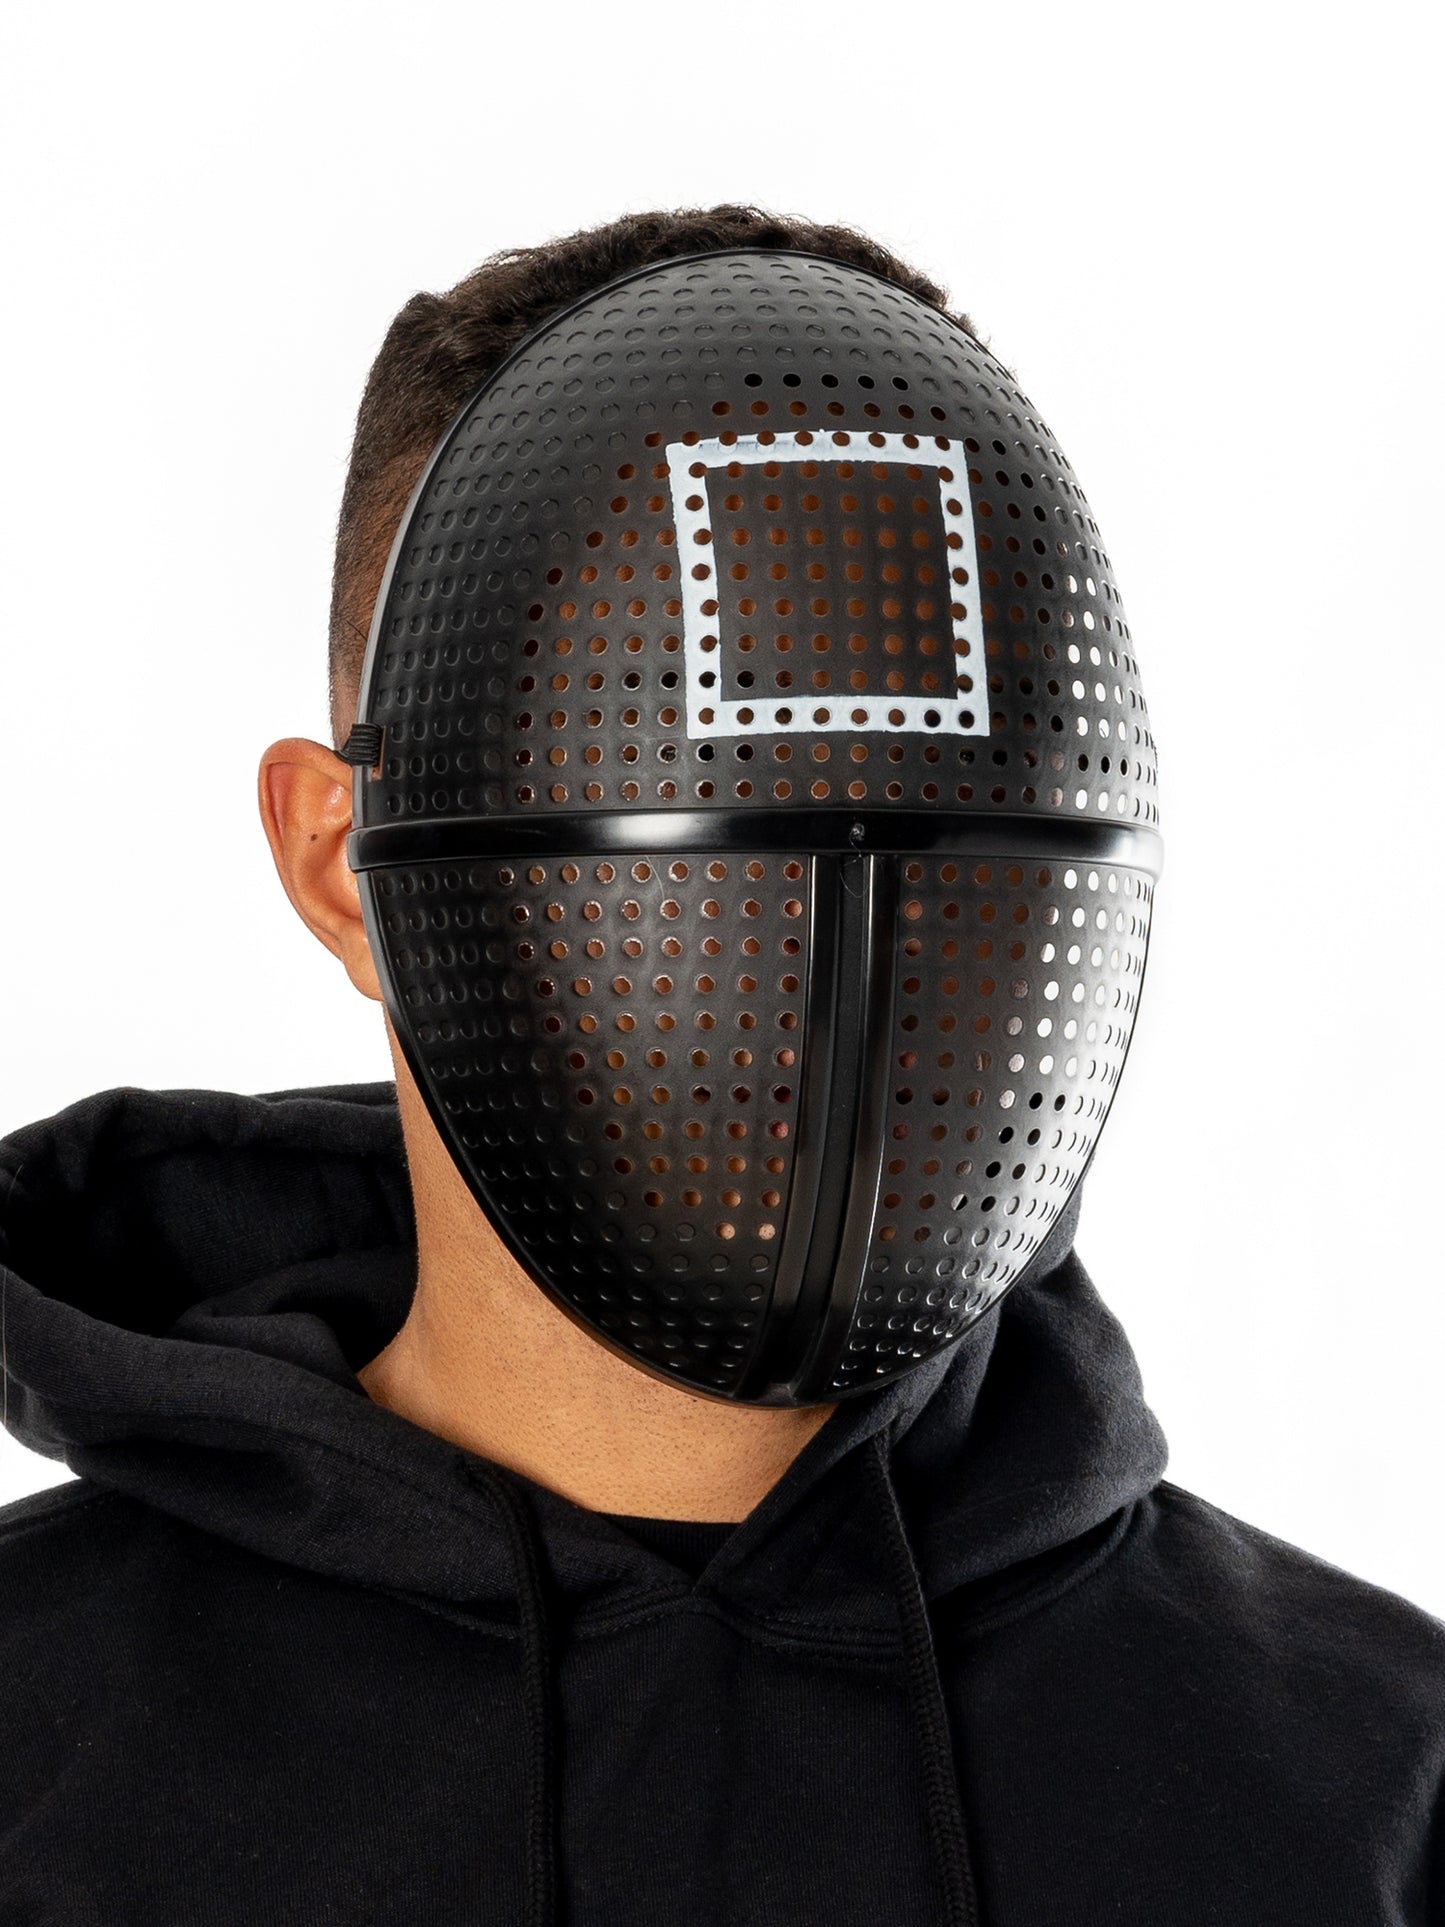 The Gamer Suit Mask - Squid Games Style